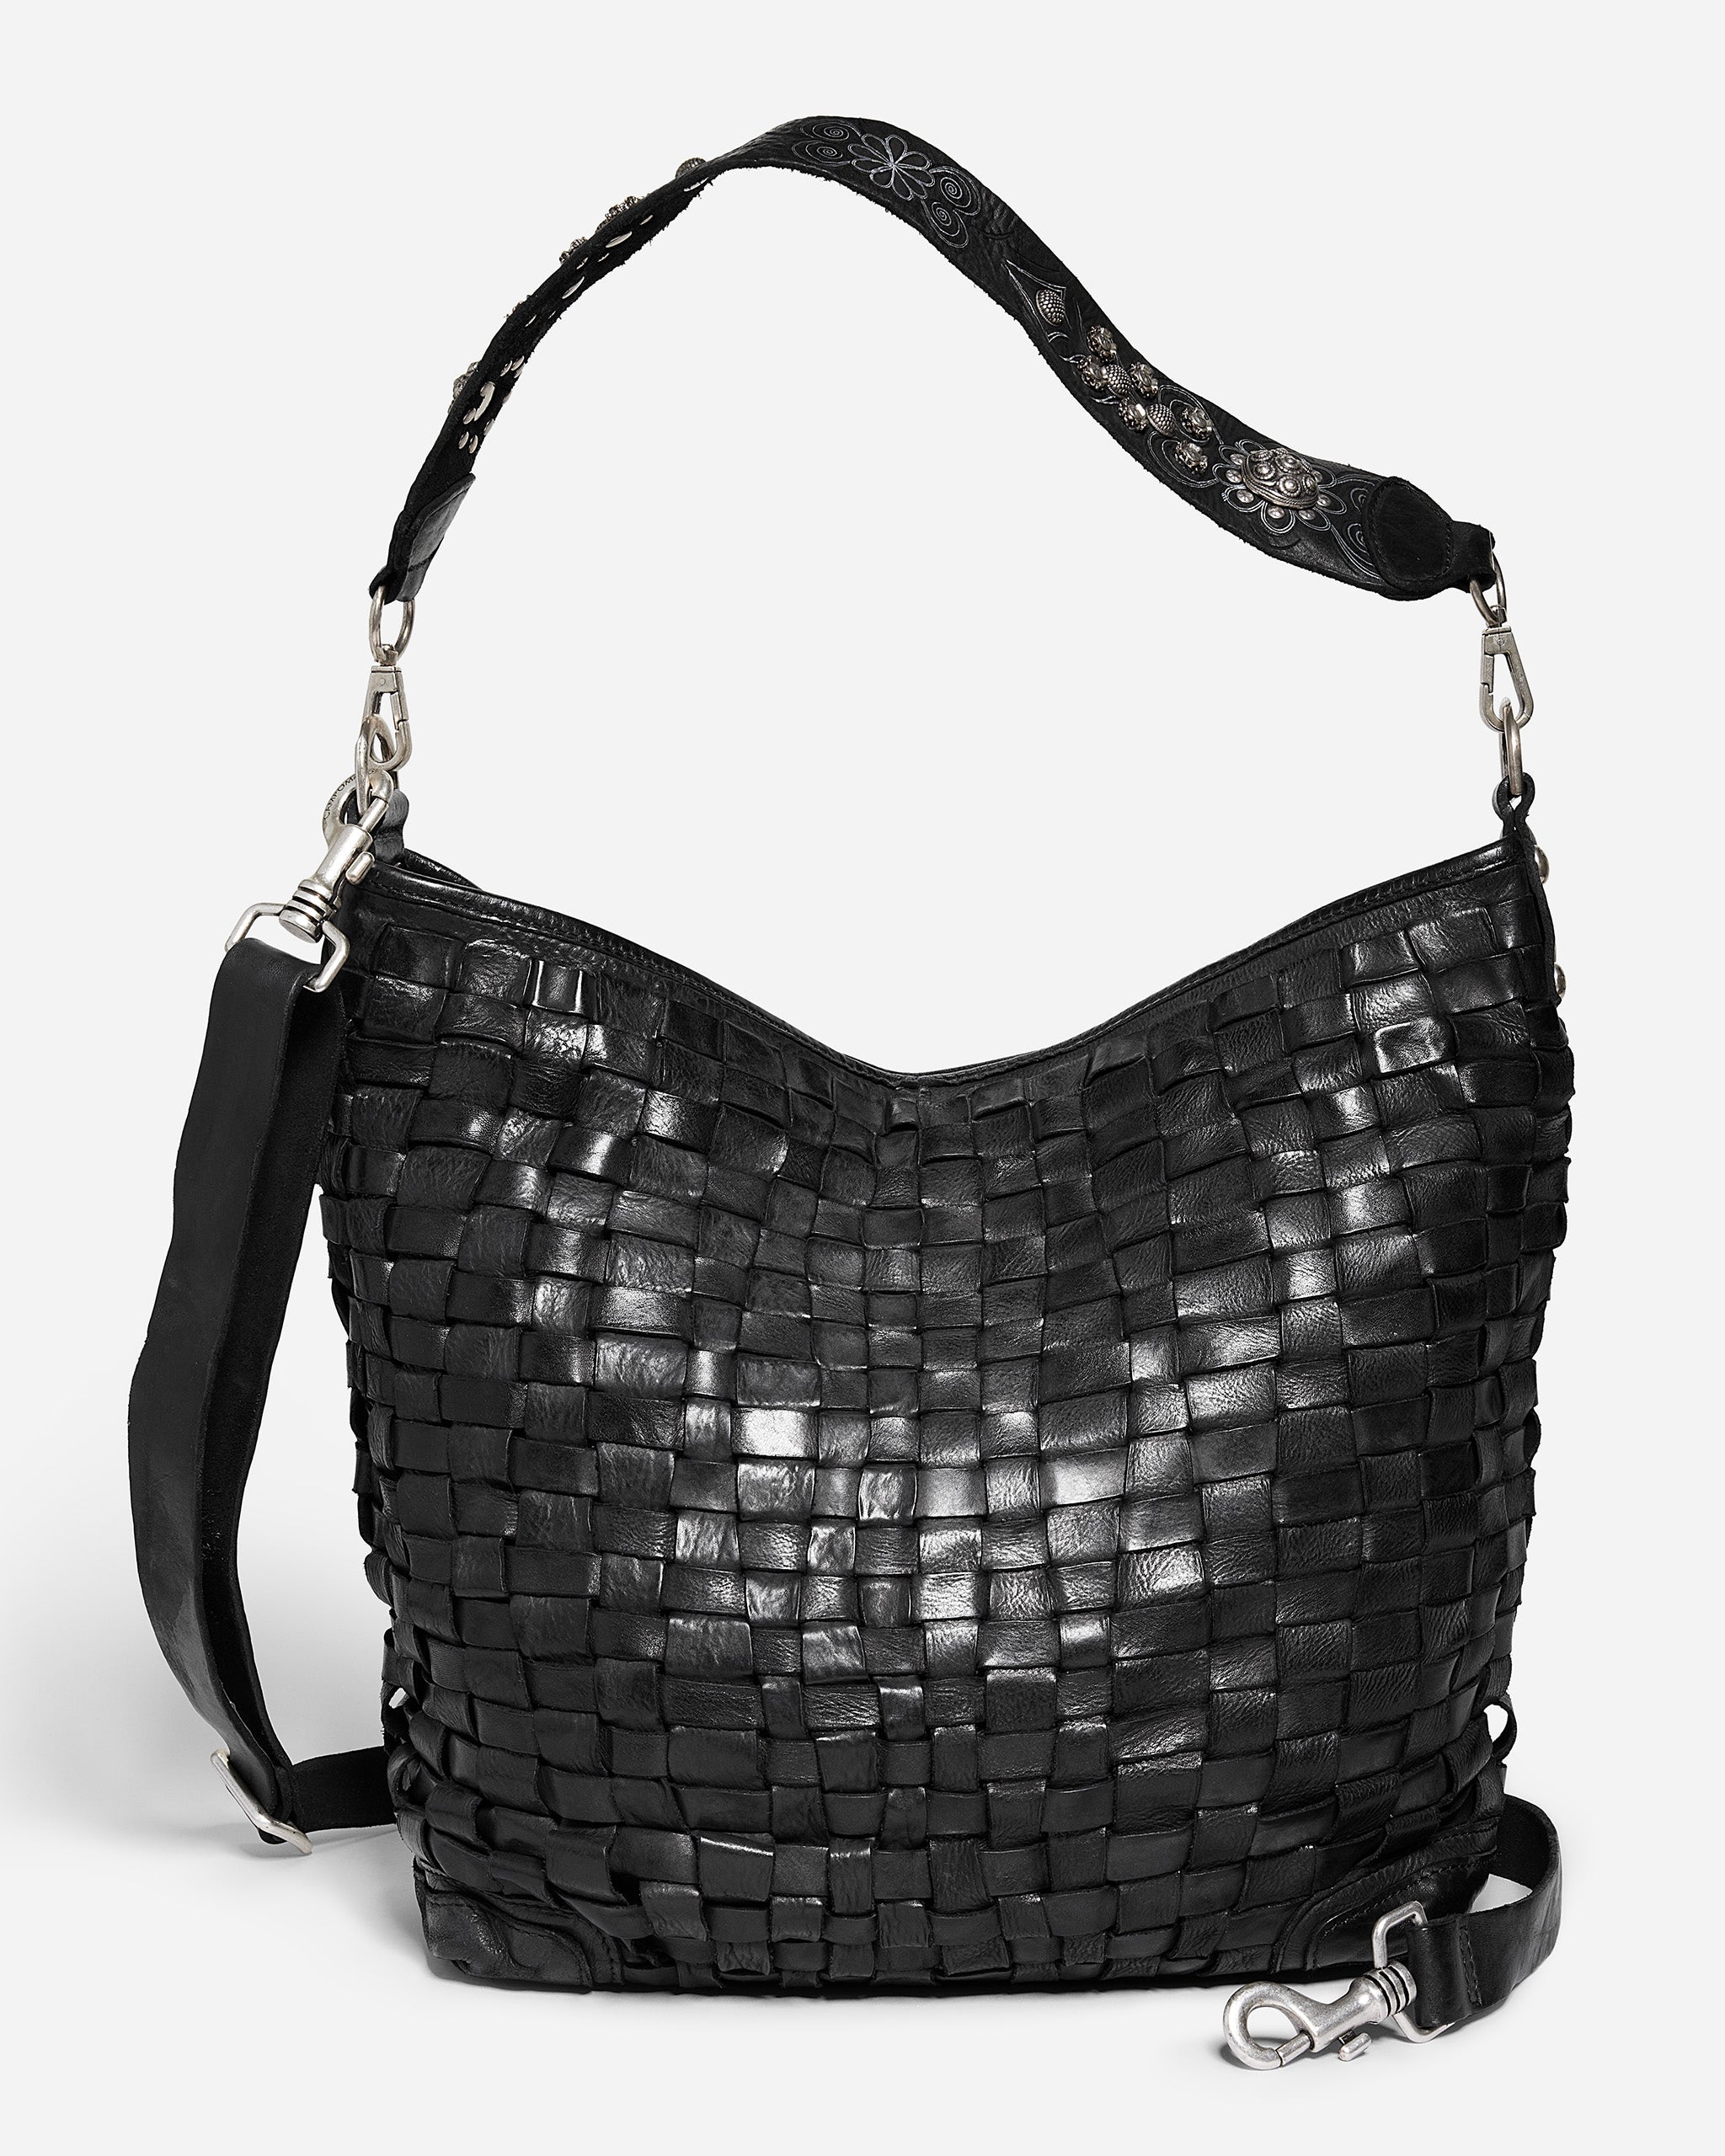 New Free People La Noche Black Studded, Leather Tote Bag Purse | Leather  tote bag, Tote bag purse, Purses and bags